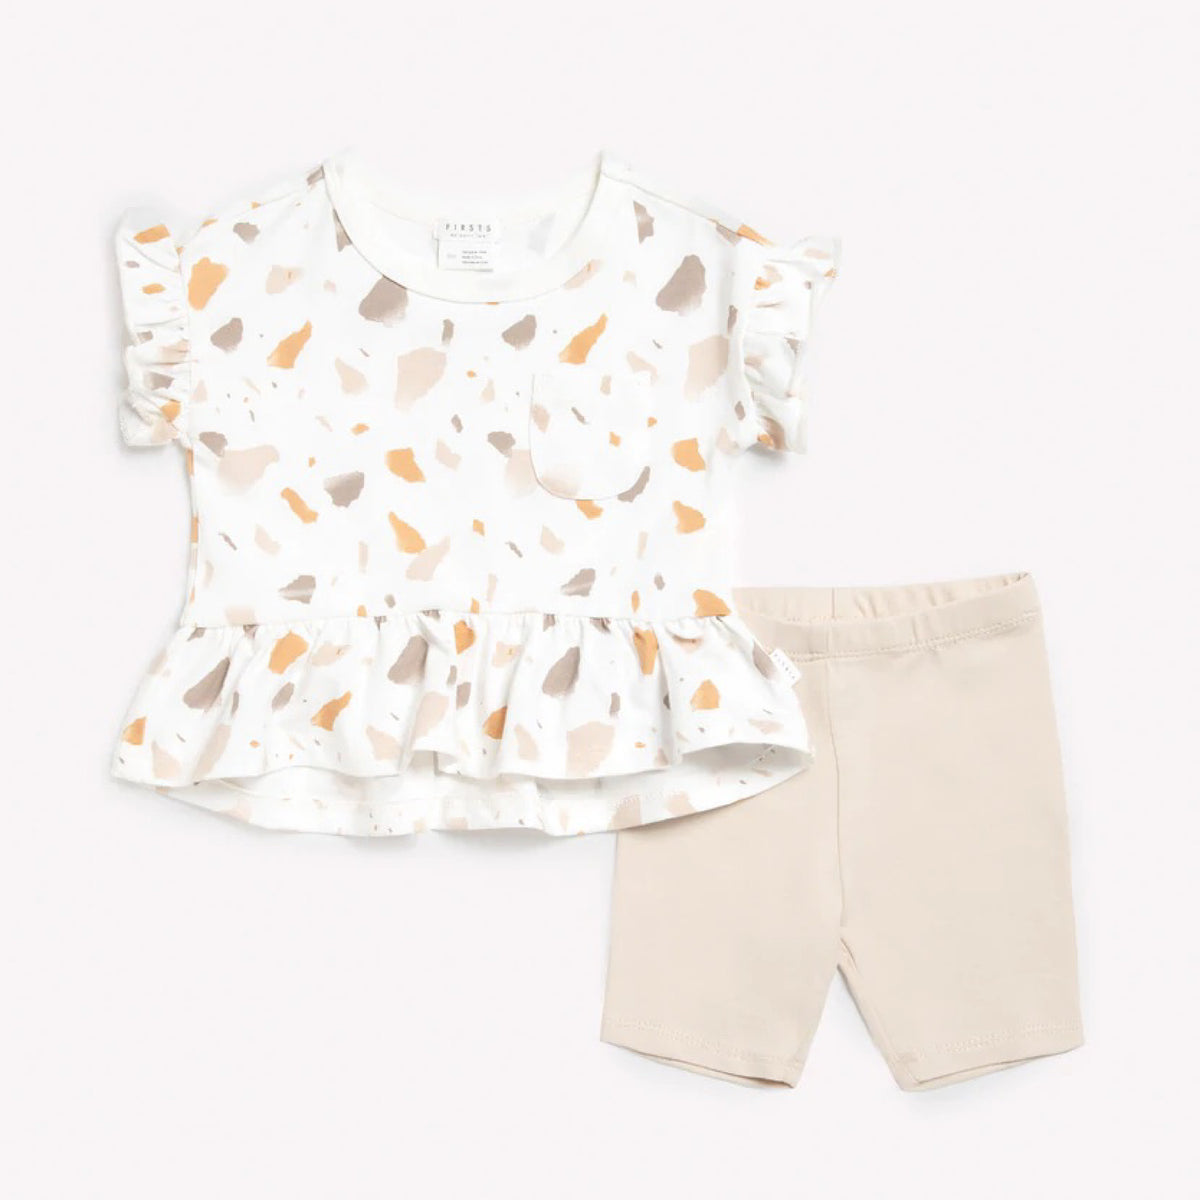 Terrazzo 2 Piece Outfit Set